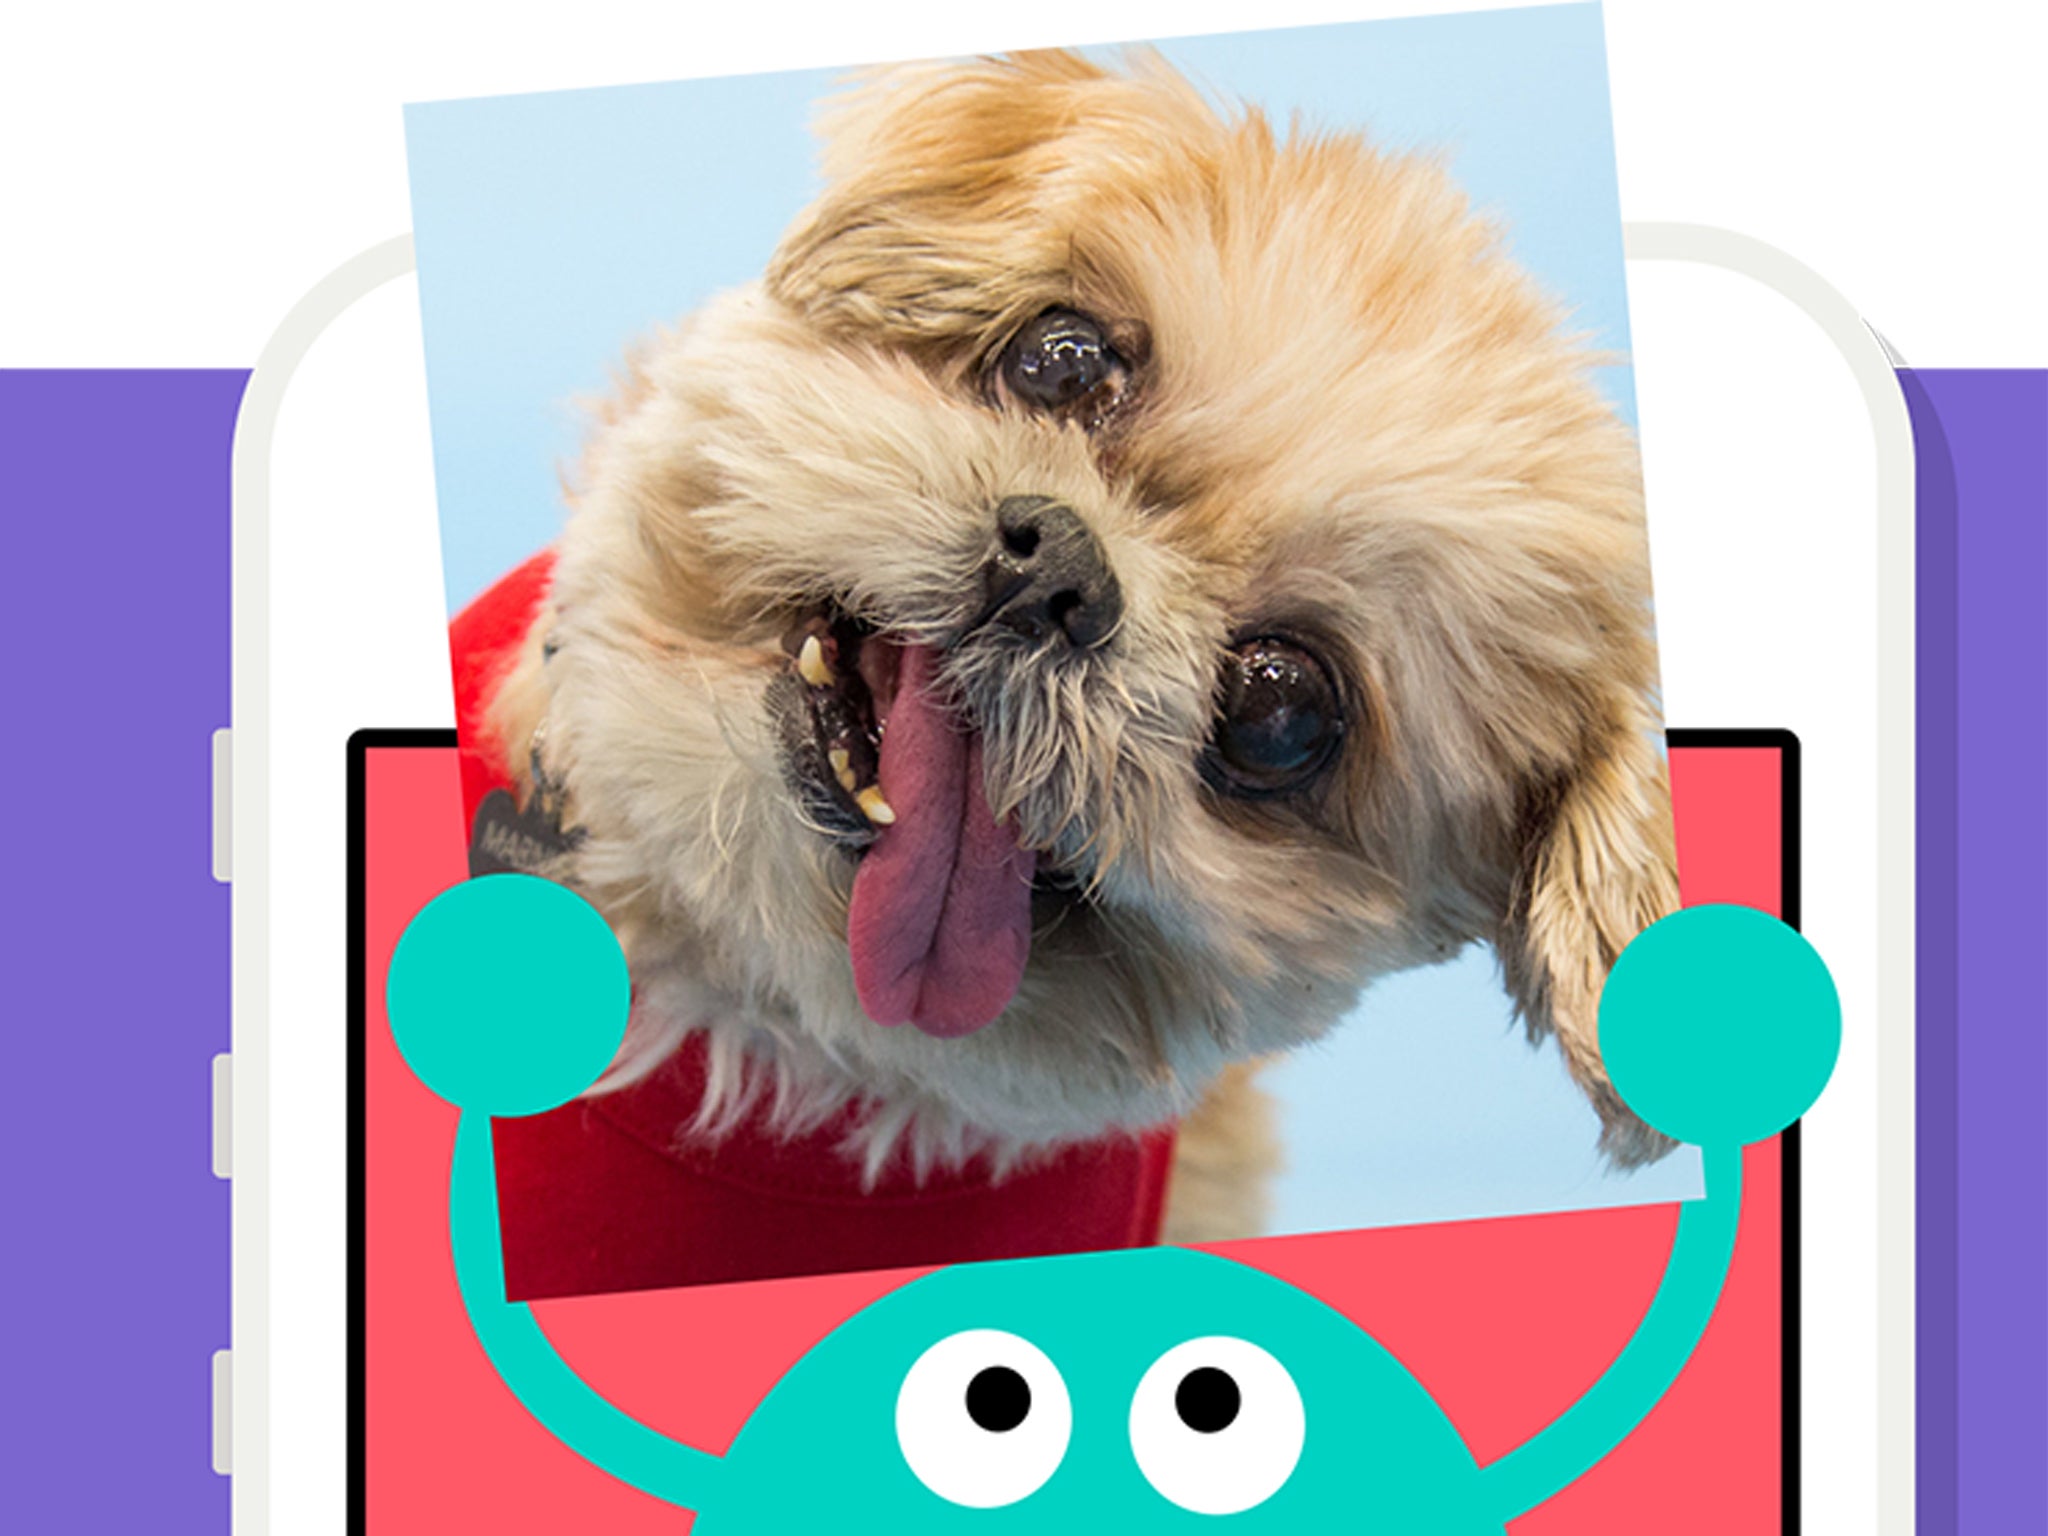 One of the characters from Vine's new app holds up a picture of online star Marnie the Dog